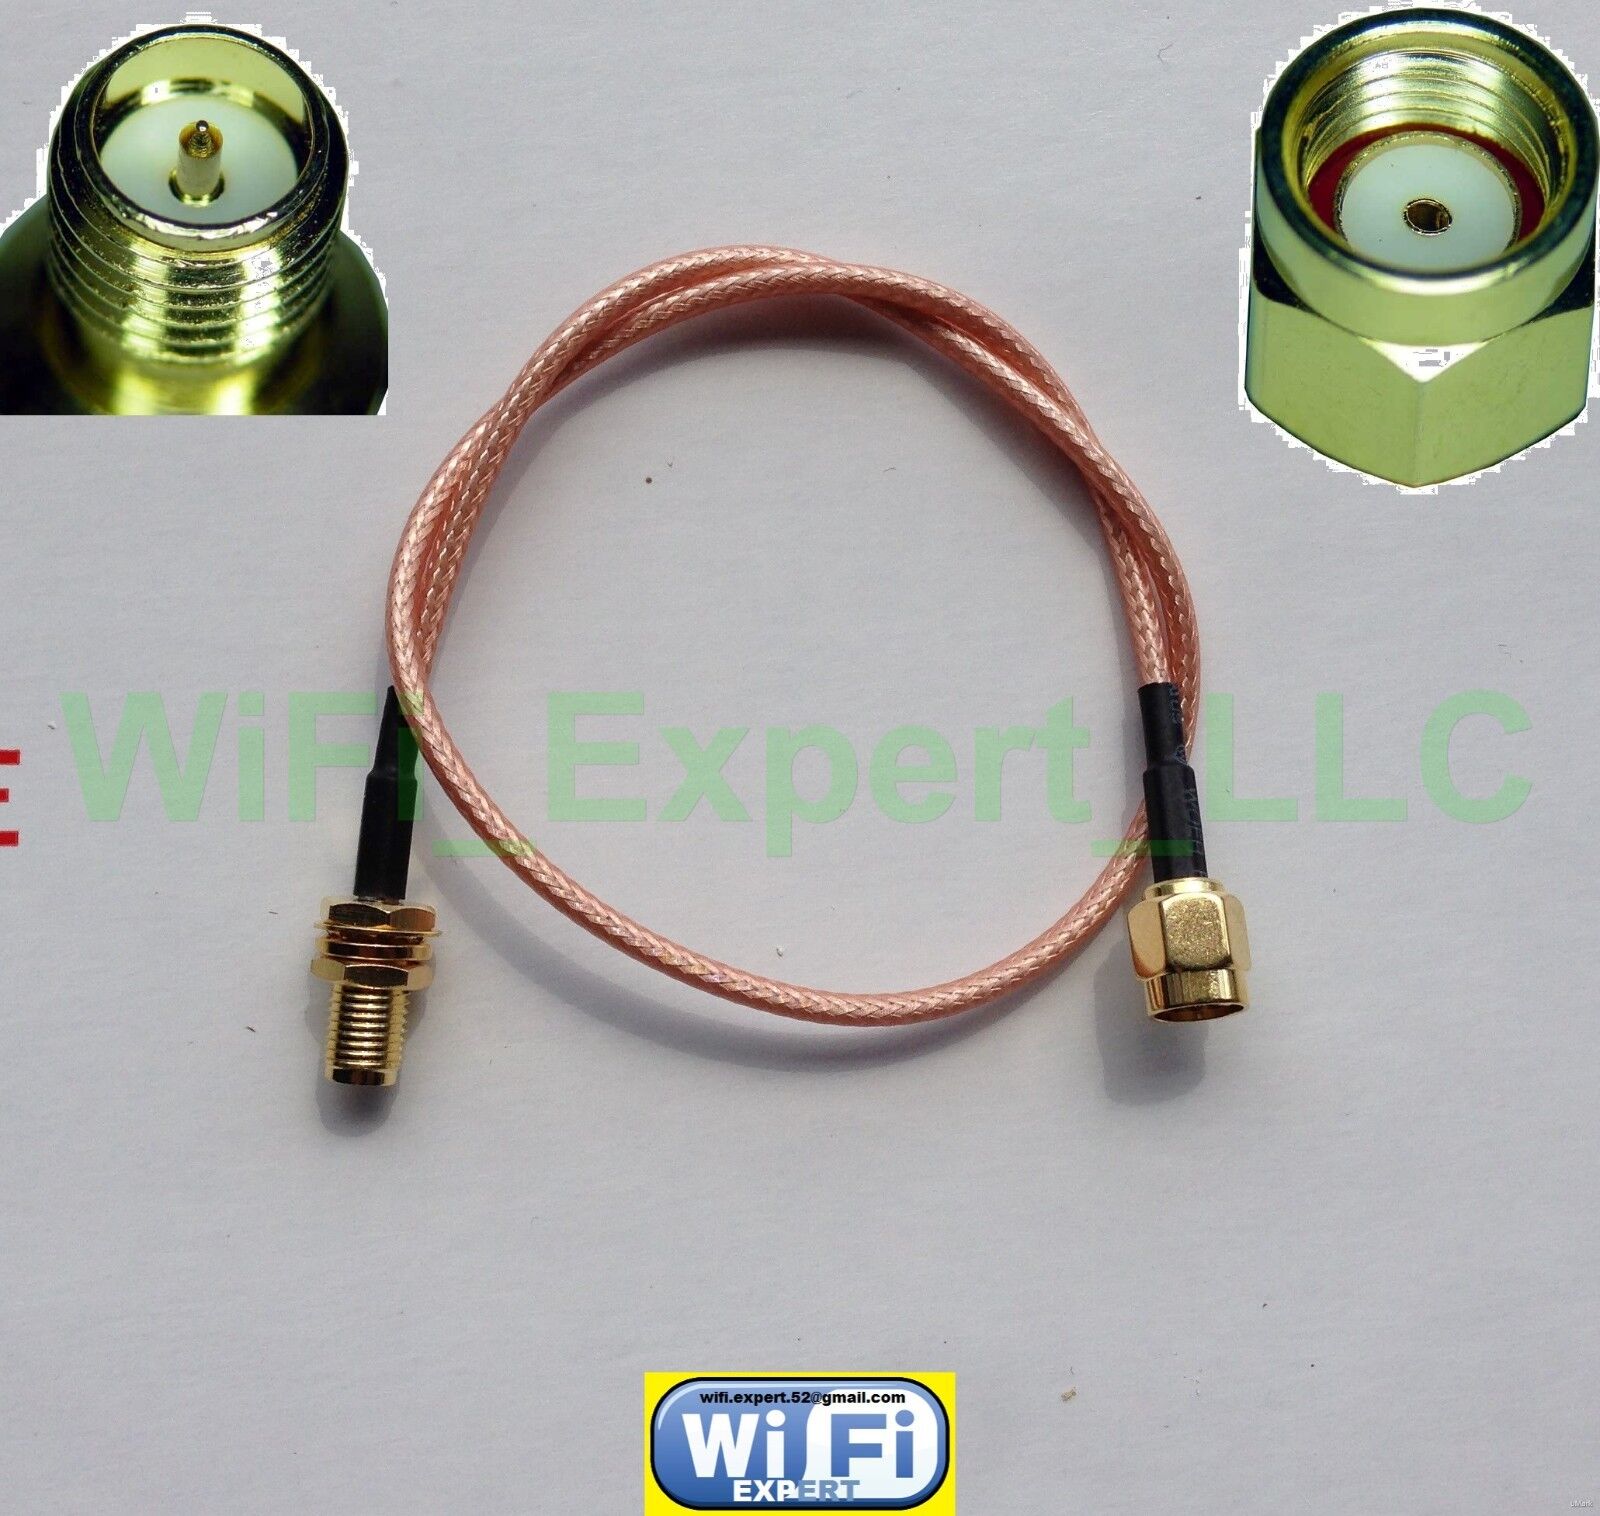 WiFi Antenna EXTENSION Cable/Lead Wireless RP SMA male to female 4 in to 10 feet